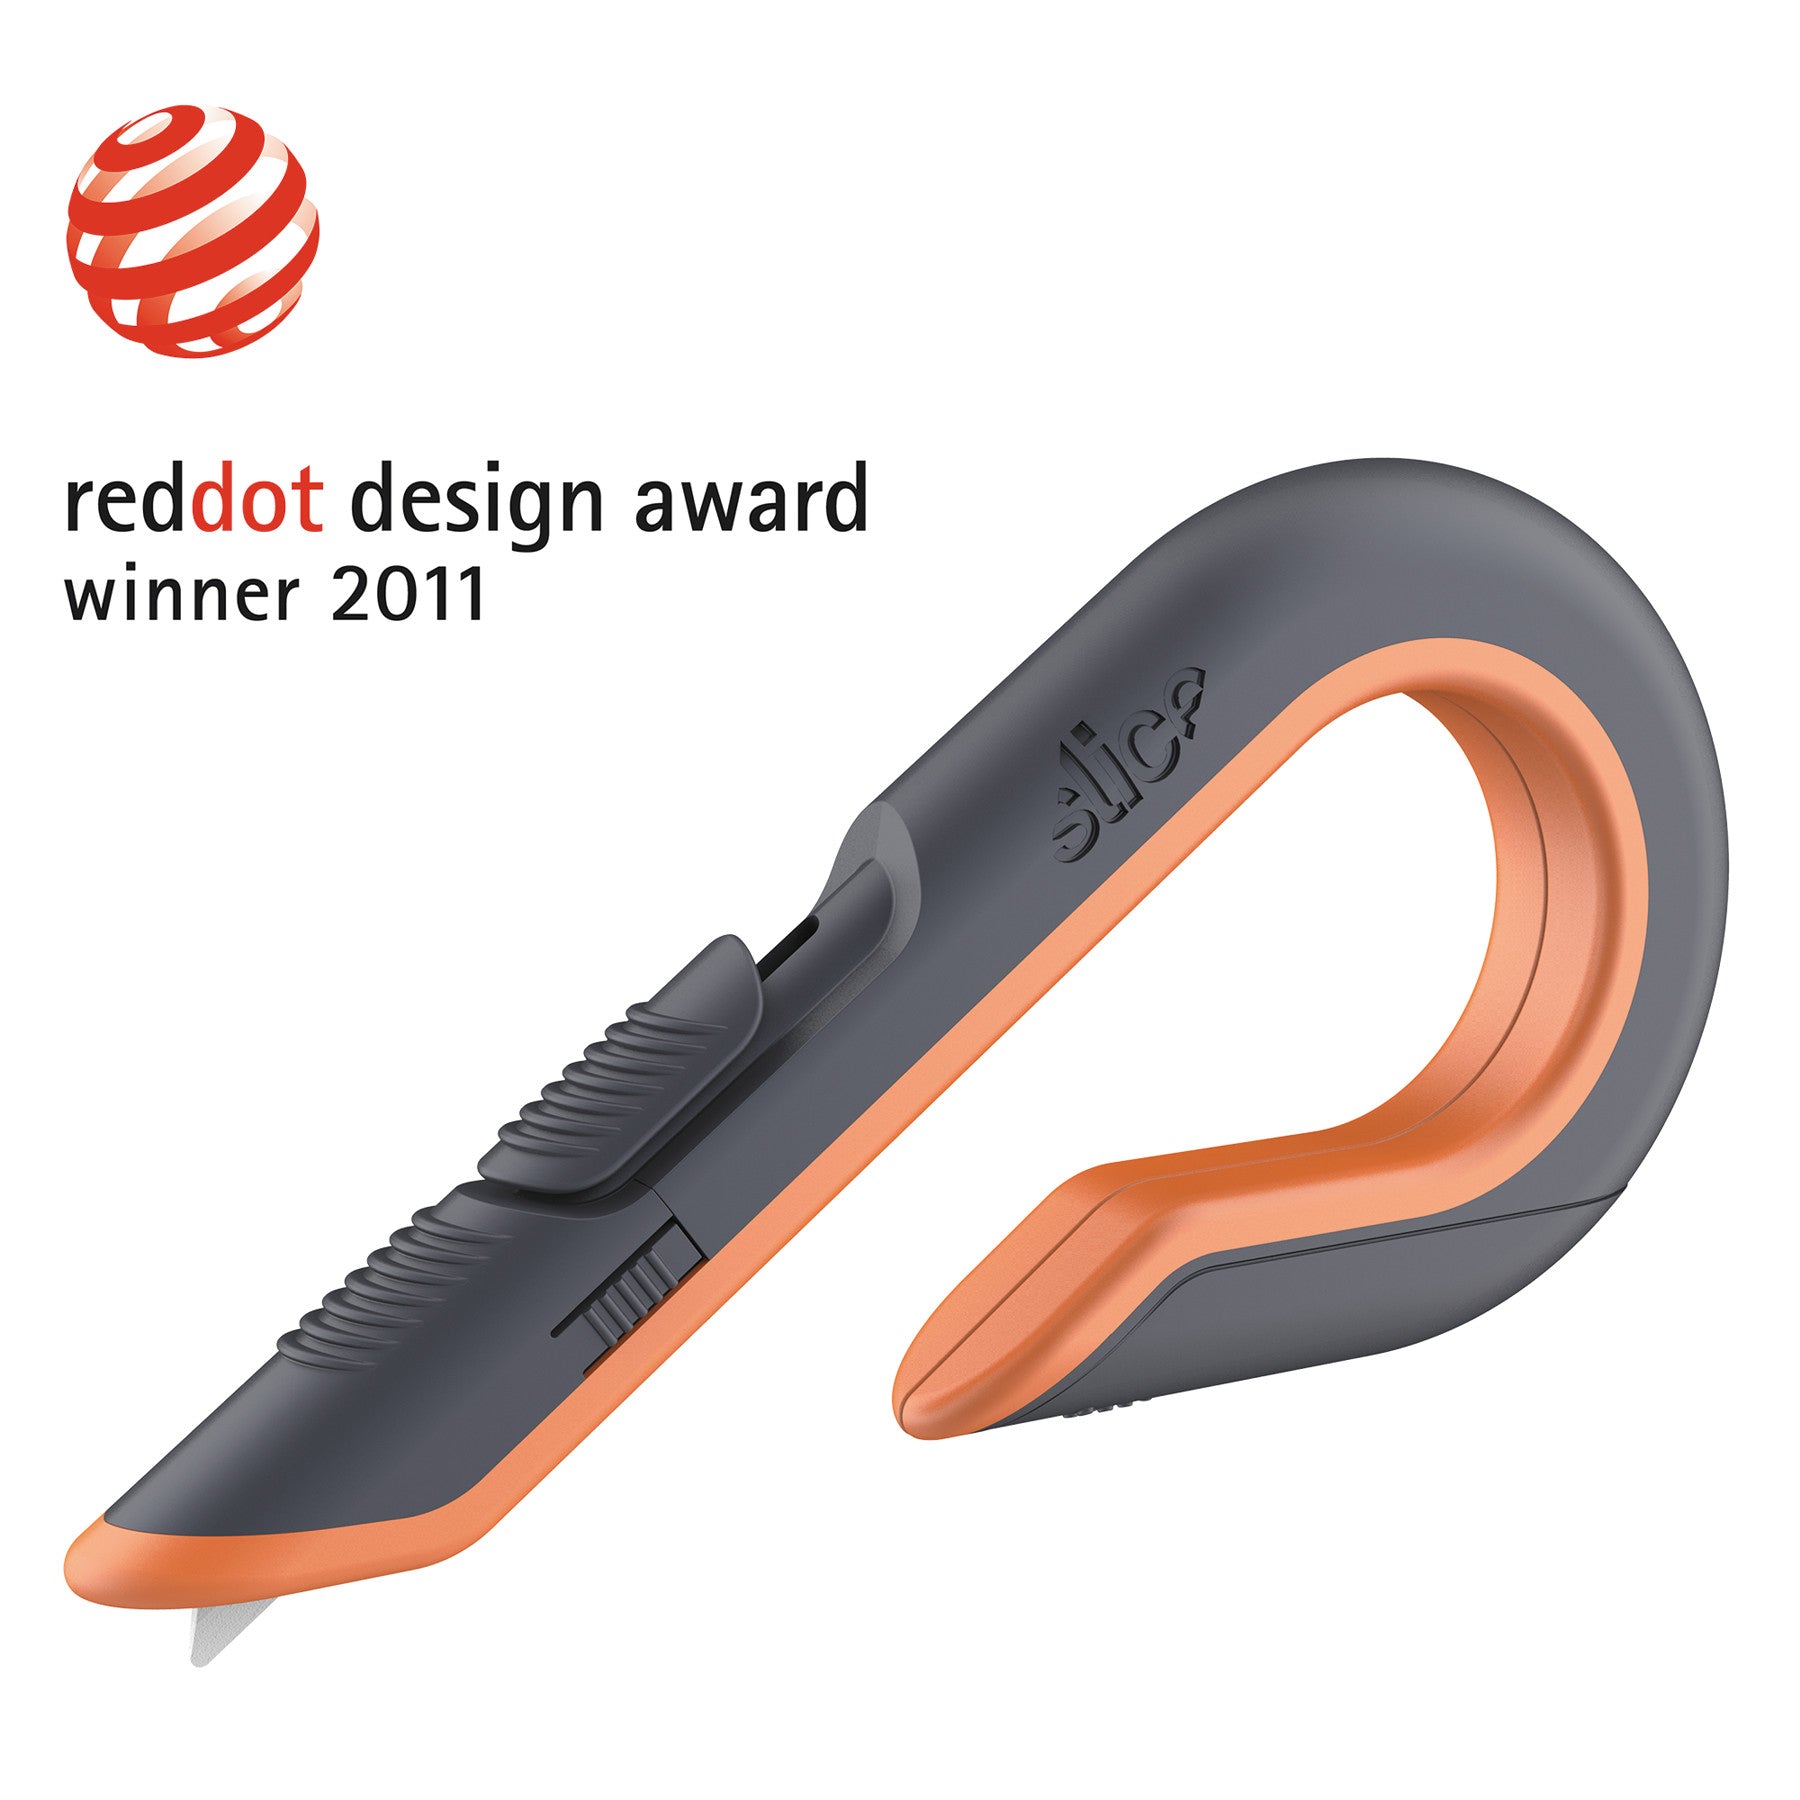 box-cutters-double-sided-replaceable-129-carbon-steel-blade-7-nylon-handle-gray-orange_sli10400 - 1